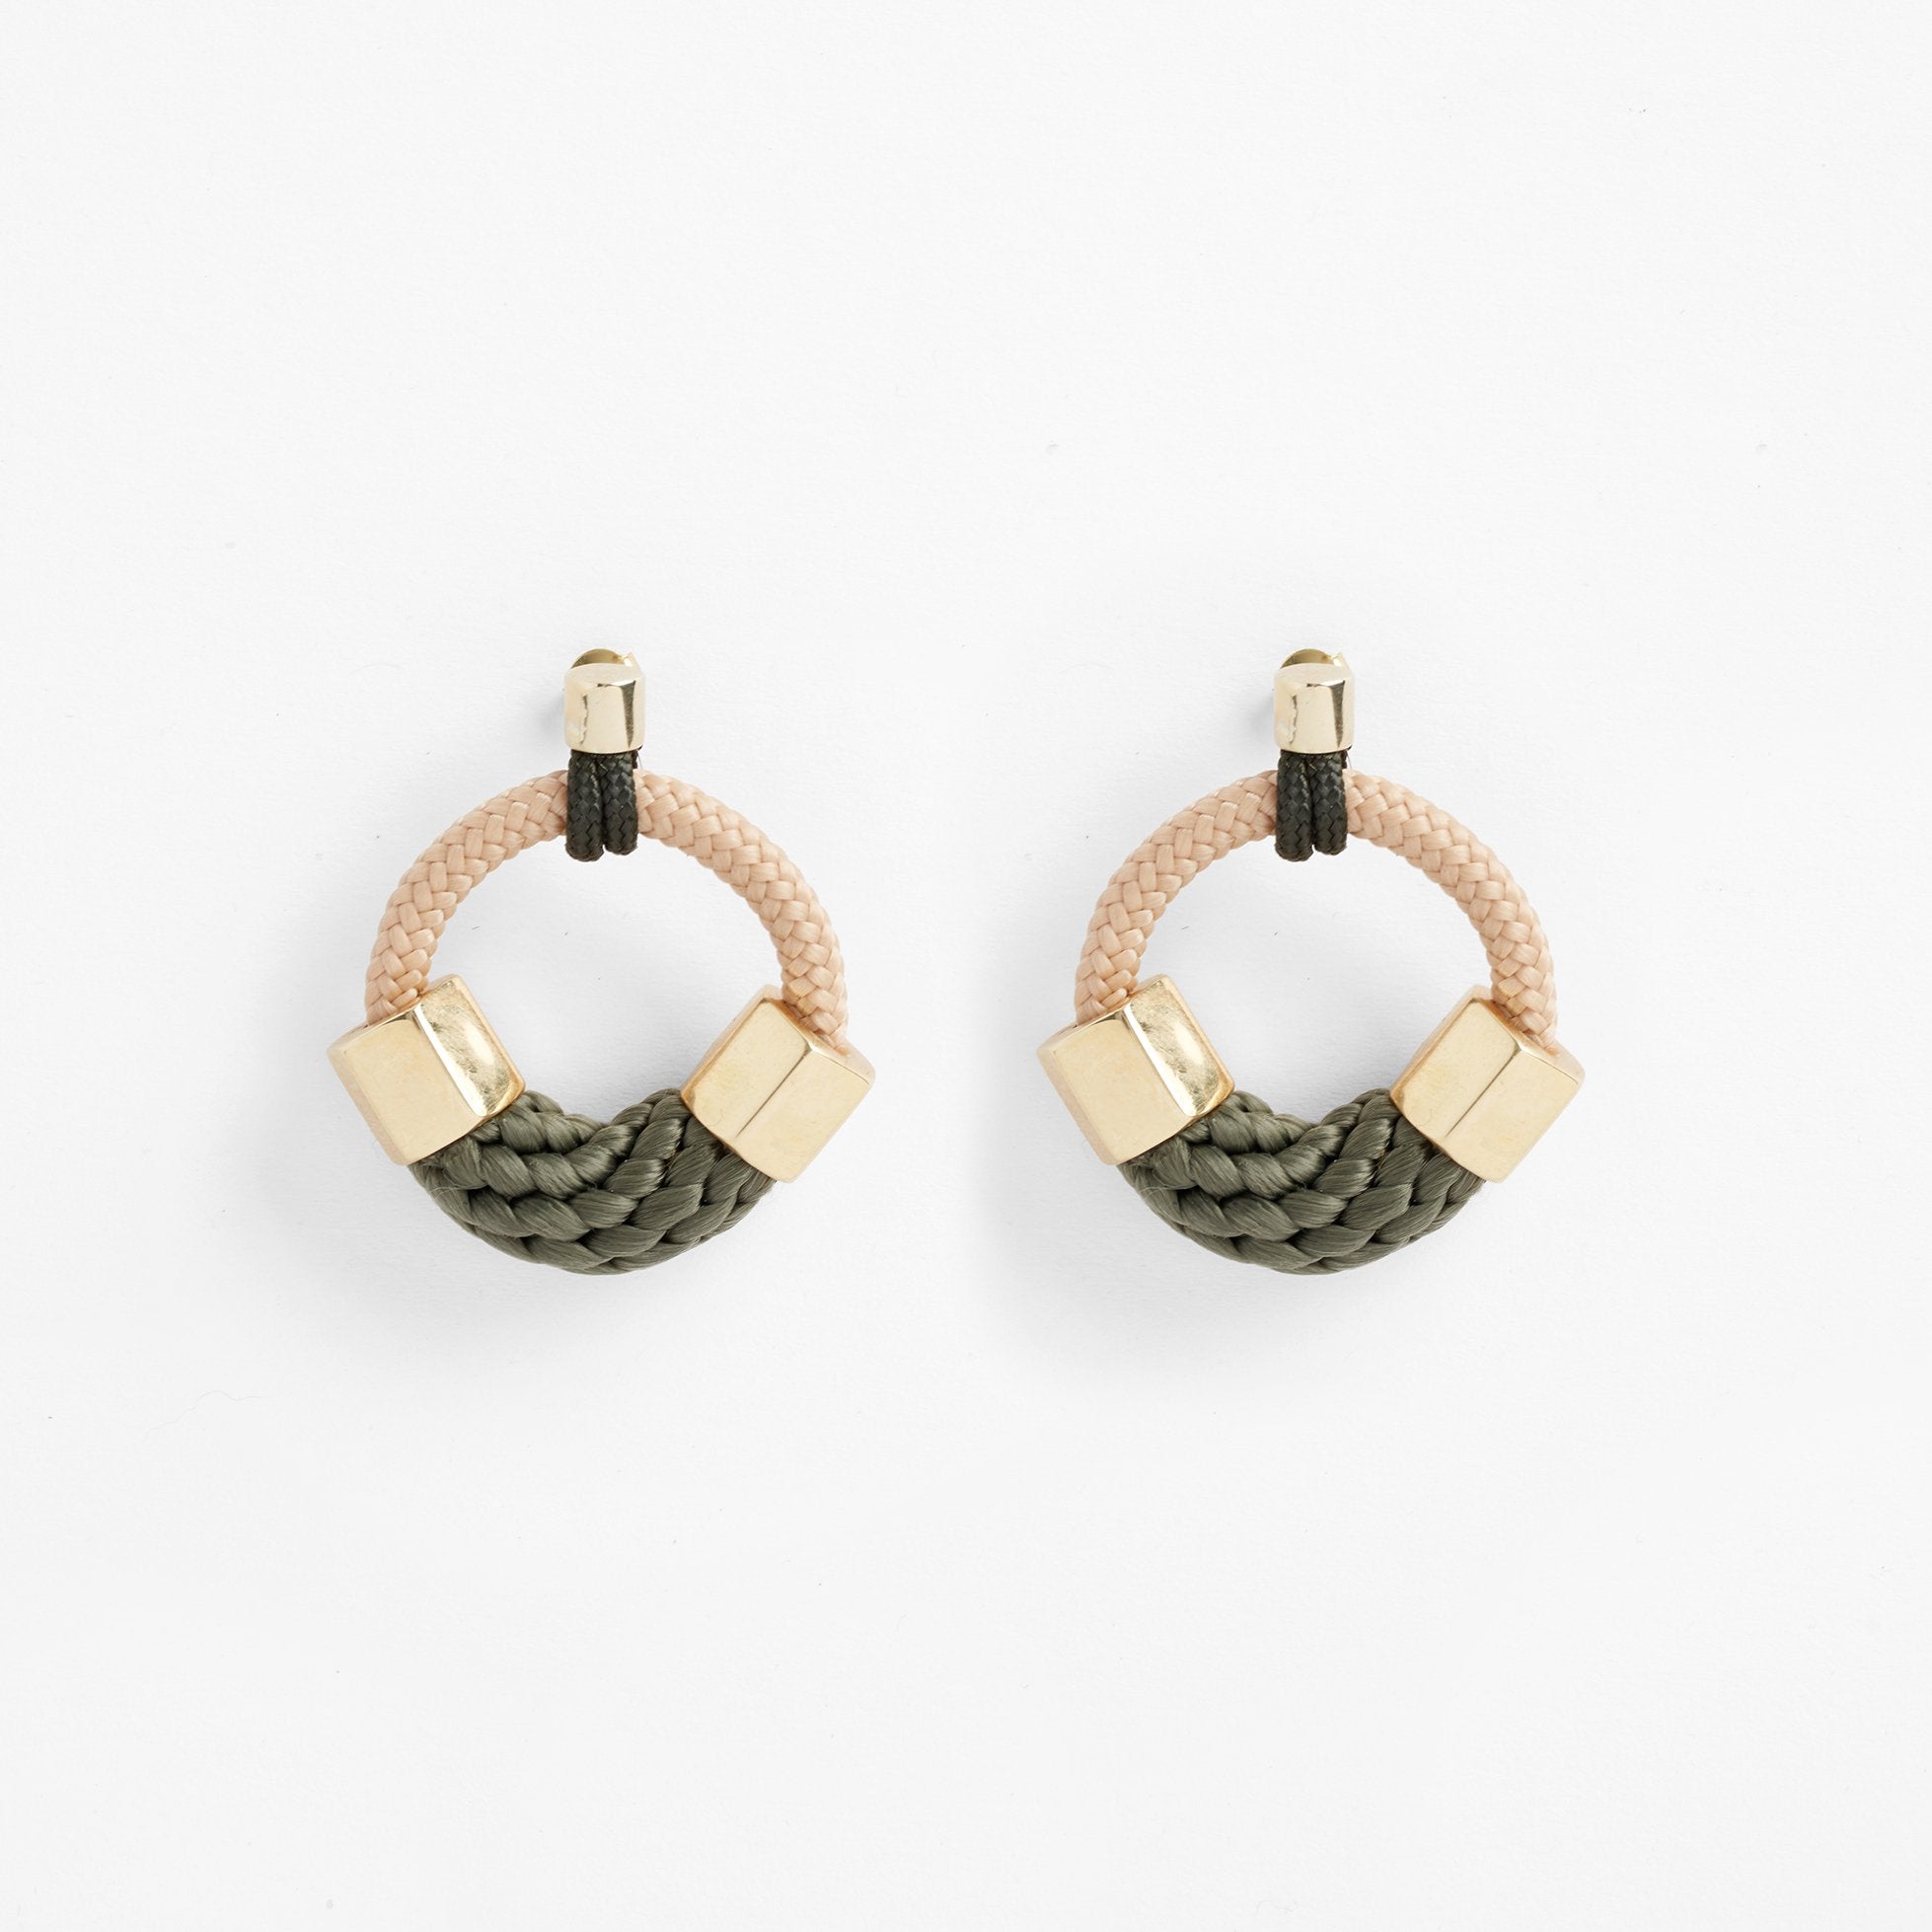 PICHULIK | Ithaca earrings, brass and rope